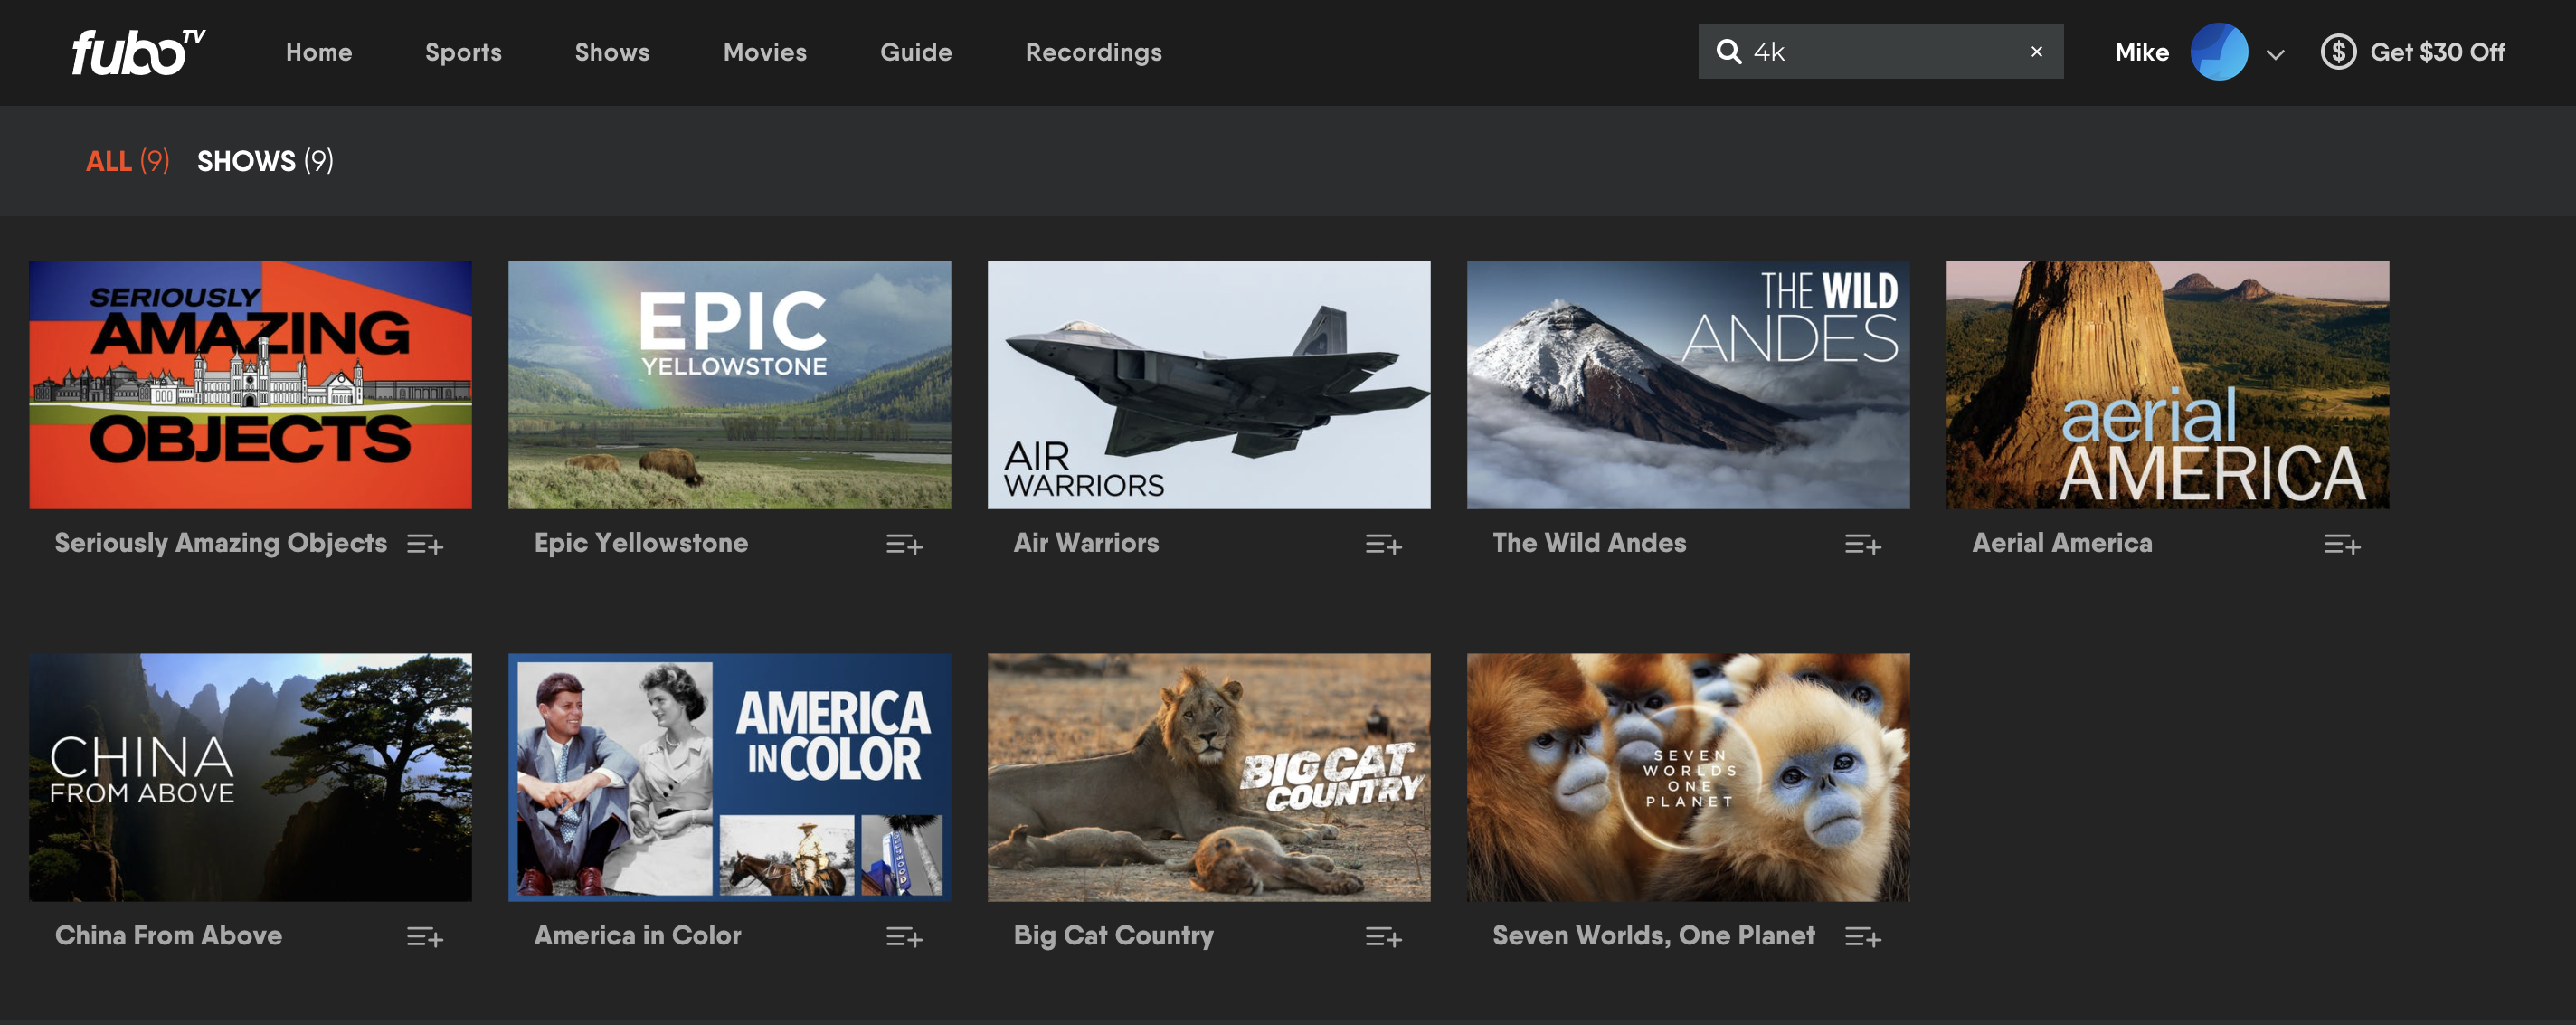 Search results in the FuboTV app showing 4K HDR programming available On Demand